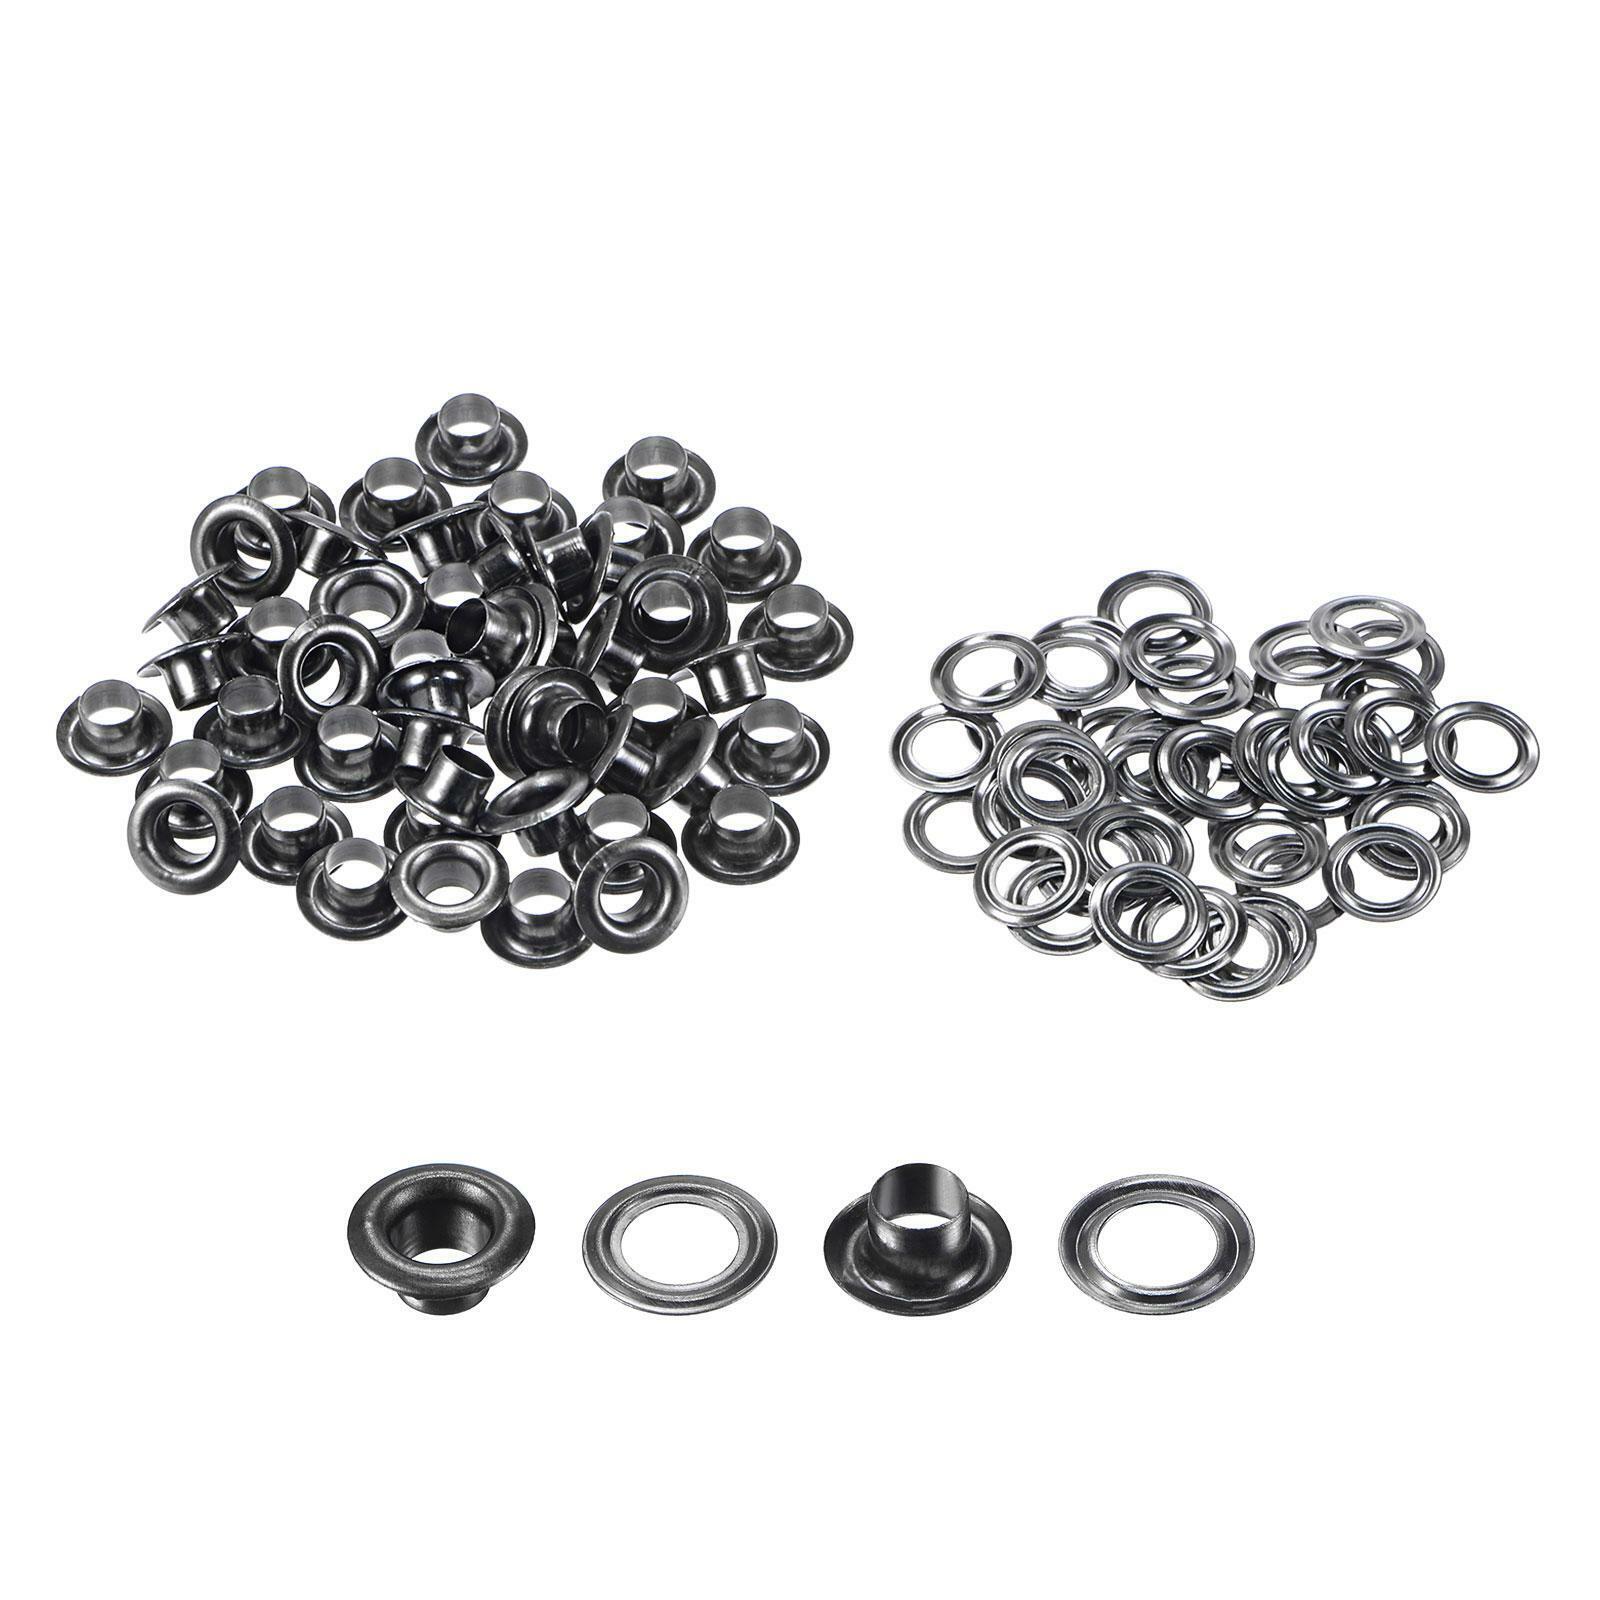 50set 5.5mm Hole Copper Grommets Eyelets Dim Grey For Fabric Leather